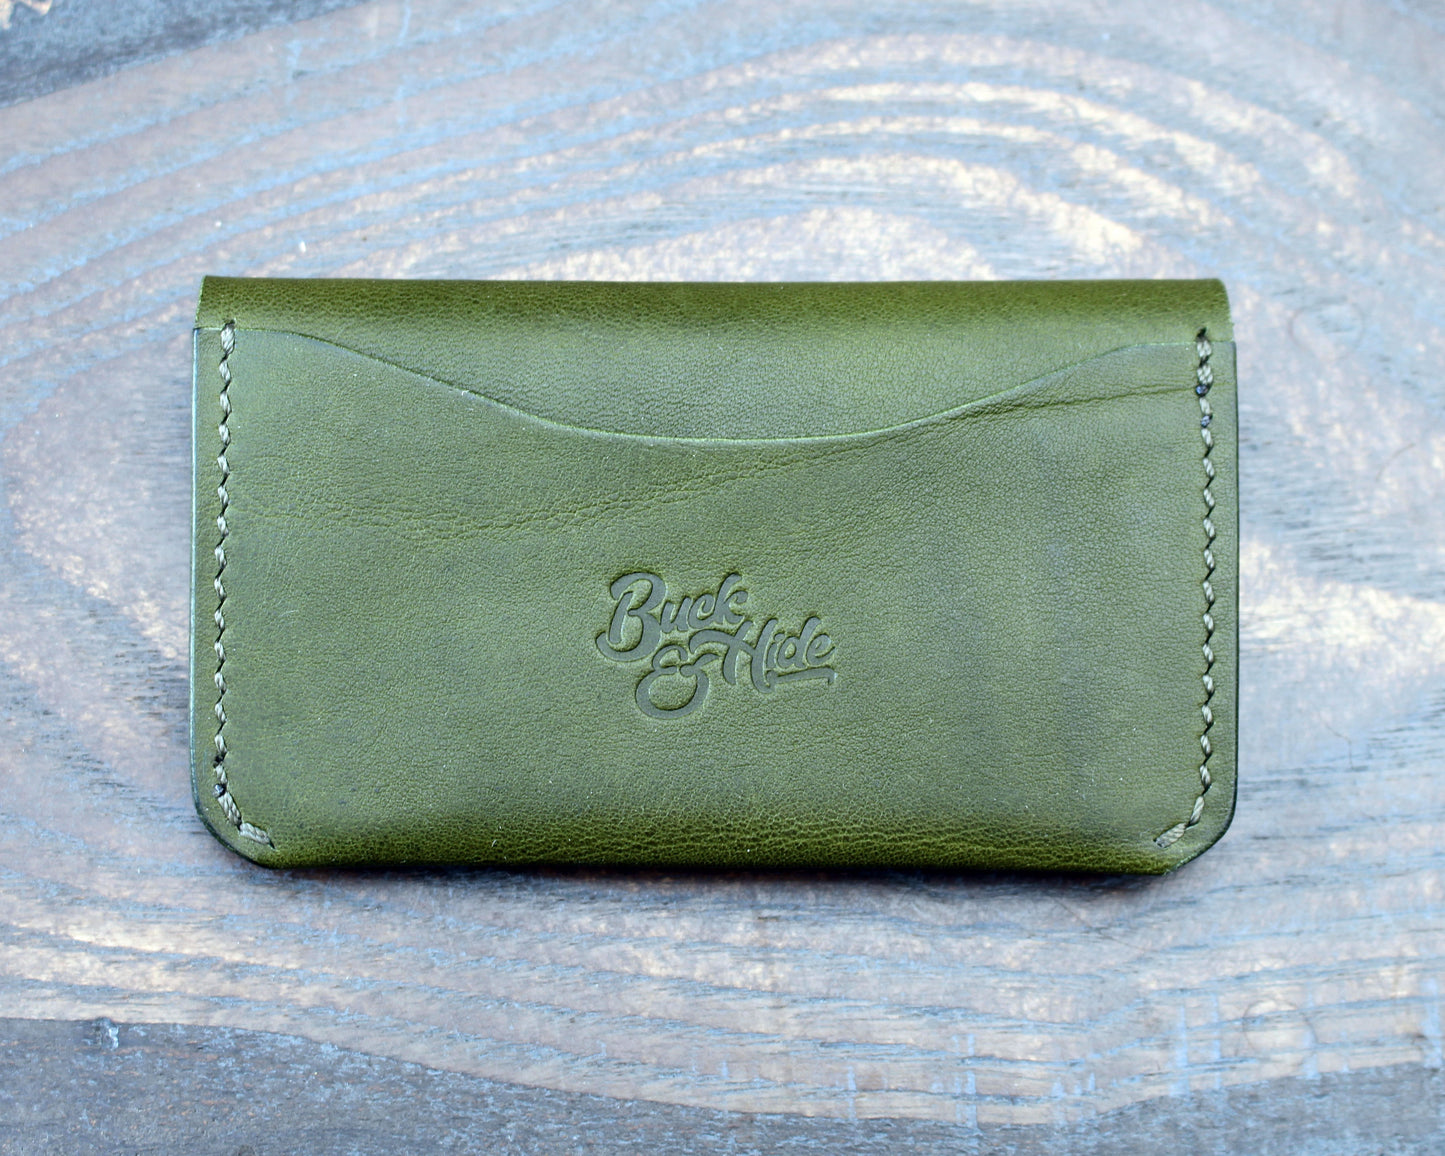 Compact snap cardholder, olive green Minerva Box